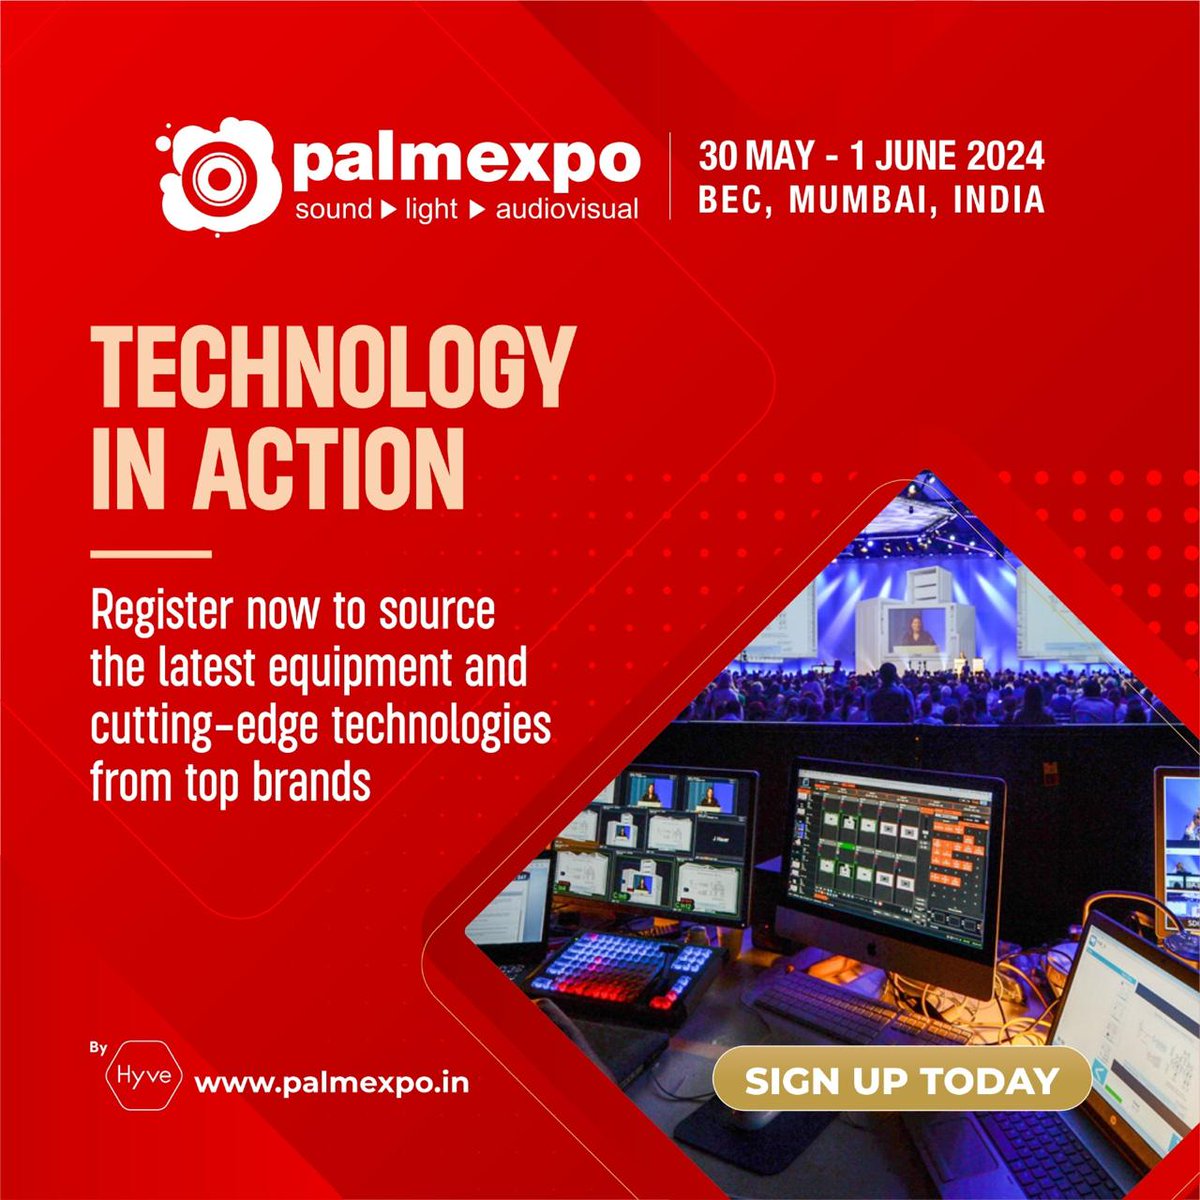 🌟 Witness the future of sound and lighting tech at PALM Expo 2024!

Connect with top brands to explore the latest industry equipment and cutting-edge technologies. 💡

Don’t miss out—secure your spot today!

#PALMExpo2024 #TechInAction #SoundAndLight #InnovationInAV #RegisterNow